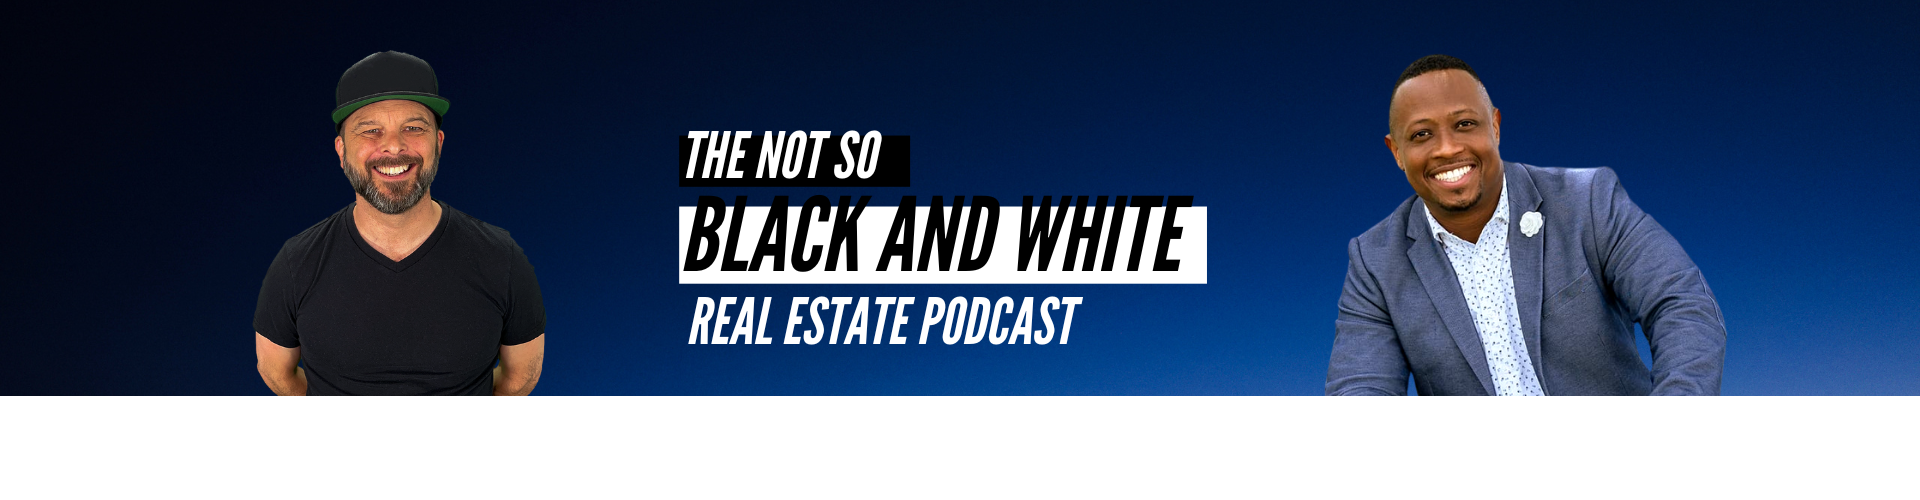 The Not So Black and White Real Estate Podcast